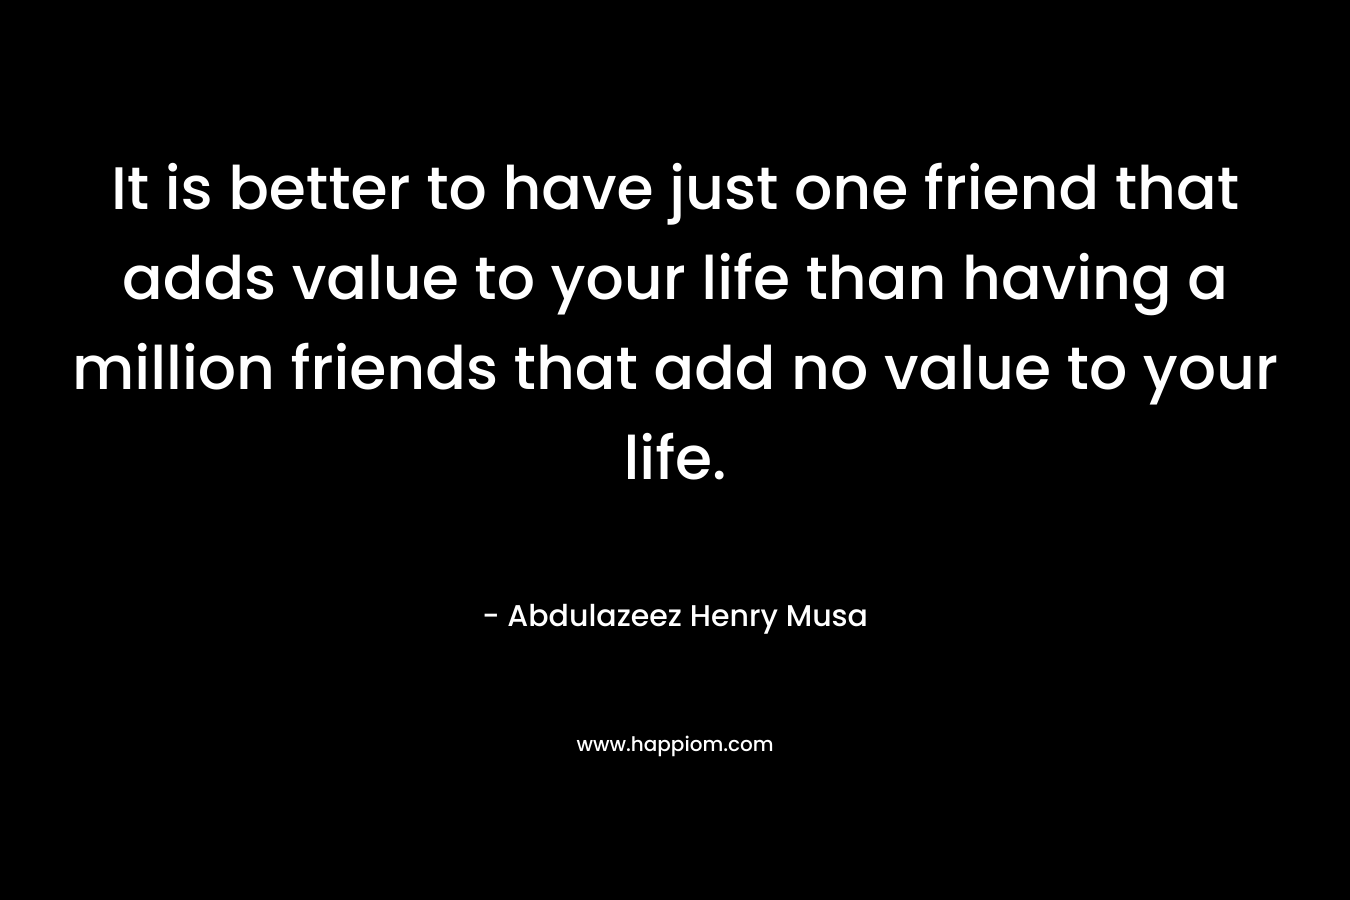 It is better to have just one friend that adds value to your life than having a million friends that add no value to your life.